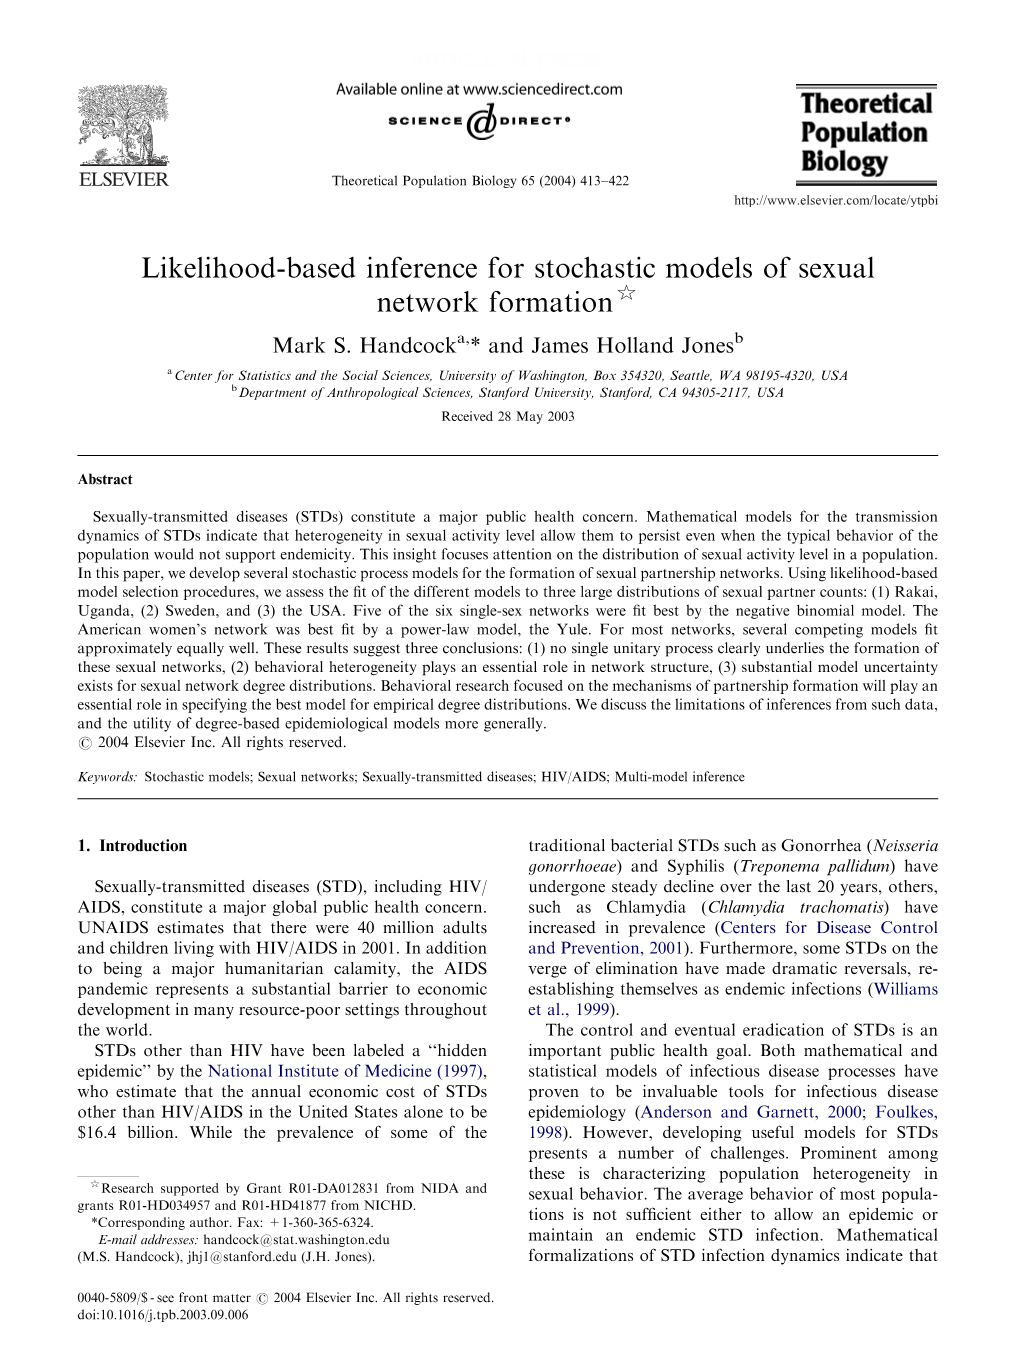 Likelihood-Based Inference for Stochastic Models of Sexual Network Formation$ Mark S